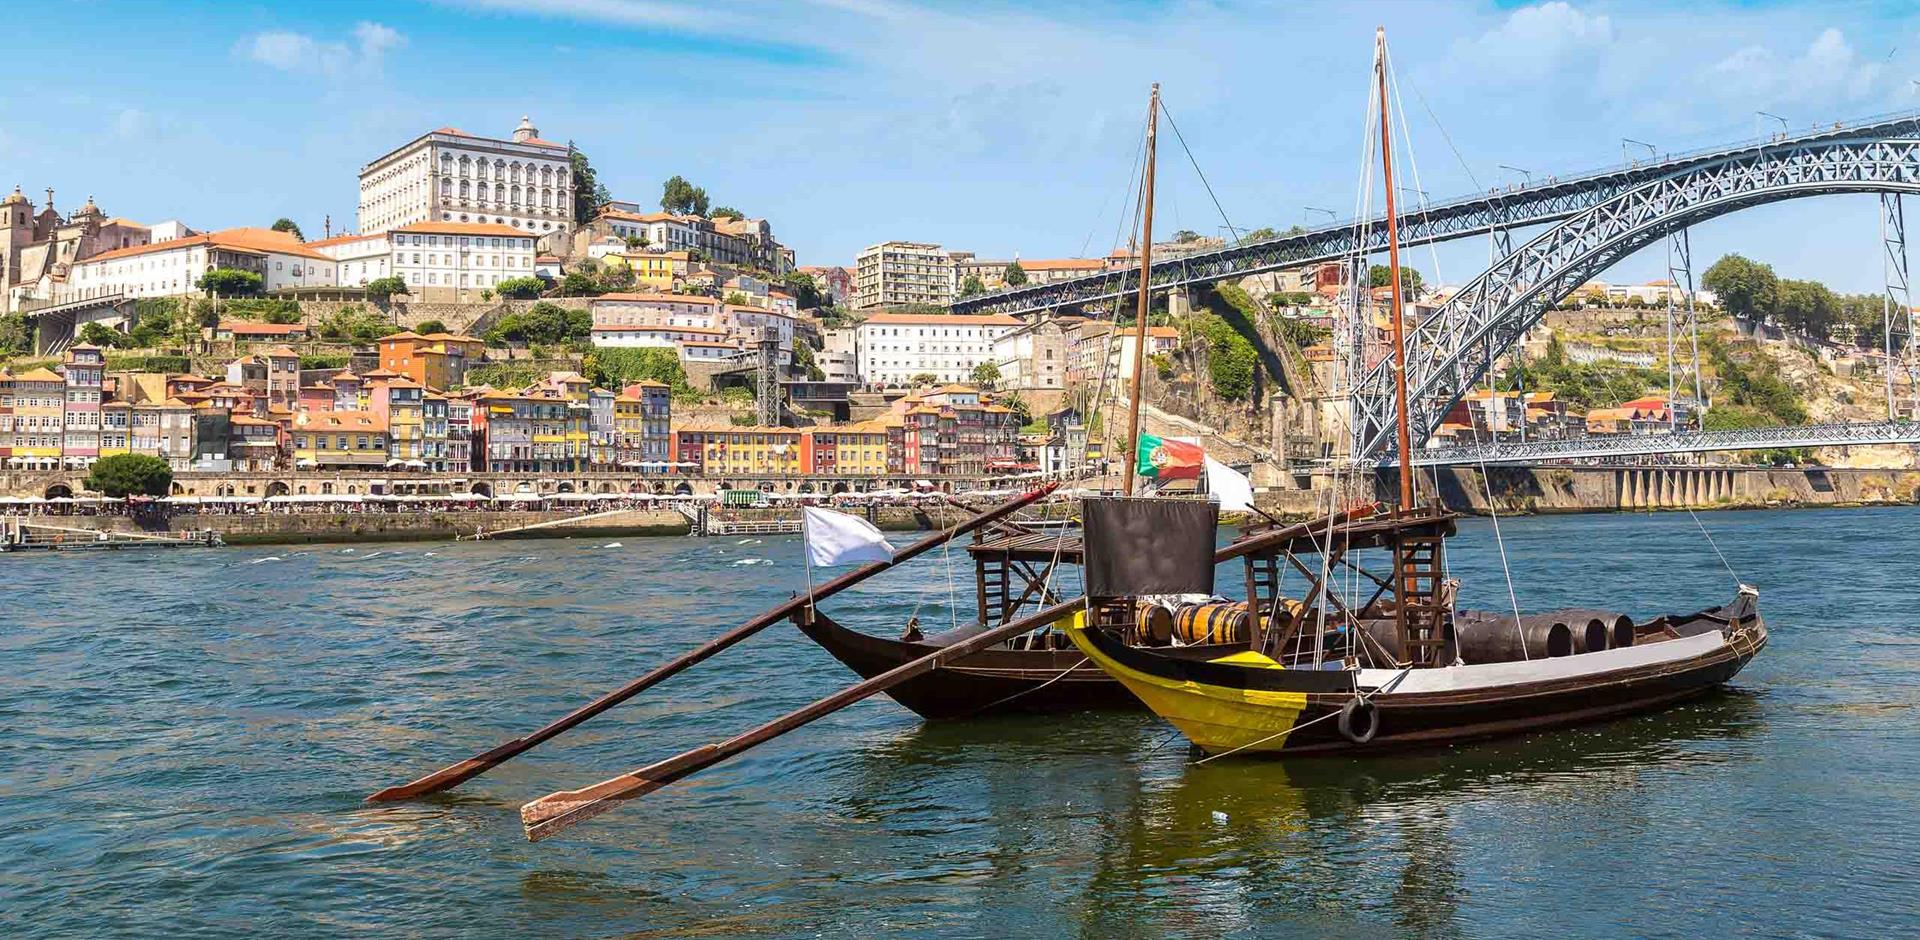 Boats with barrels on the Douro River in Porto, Portugal, Europe